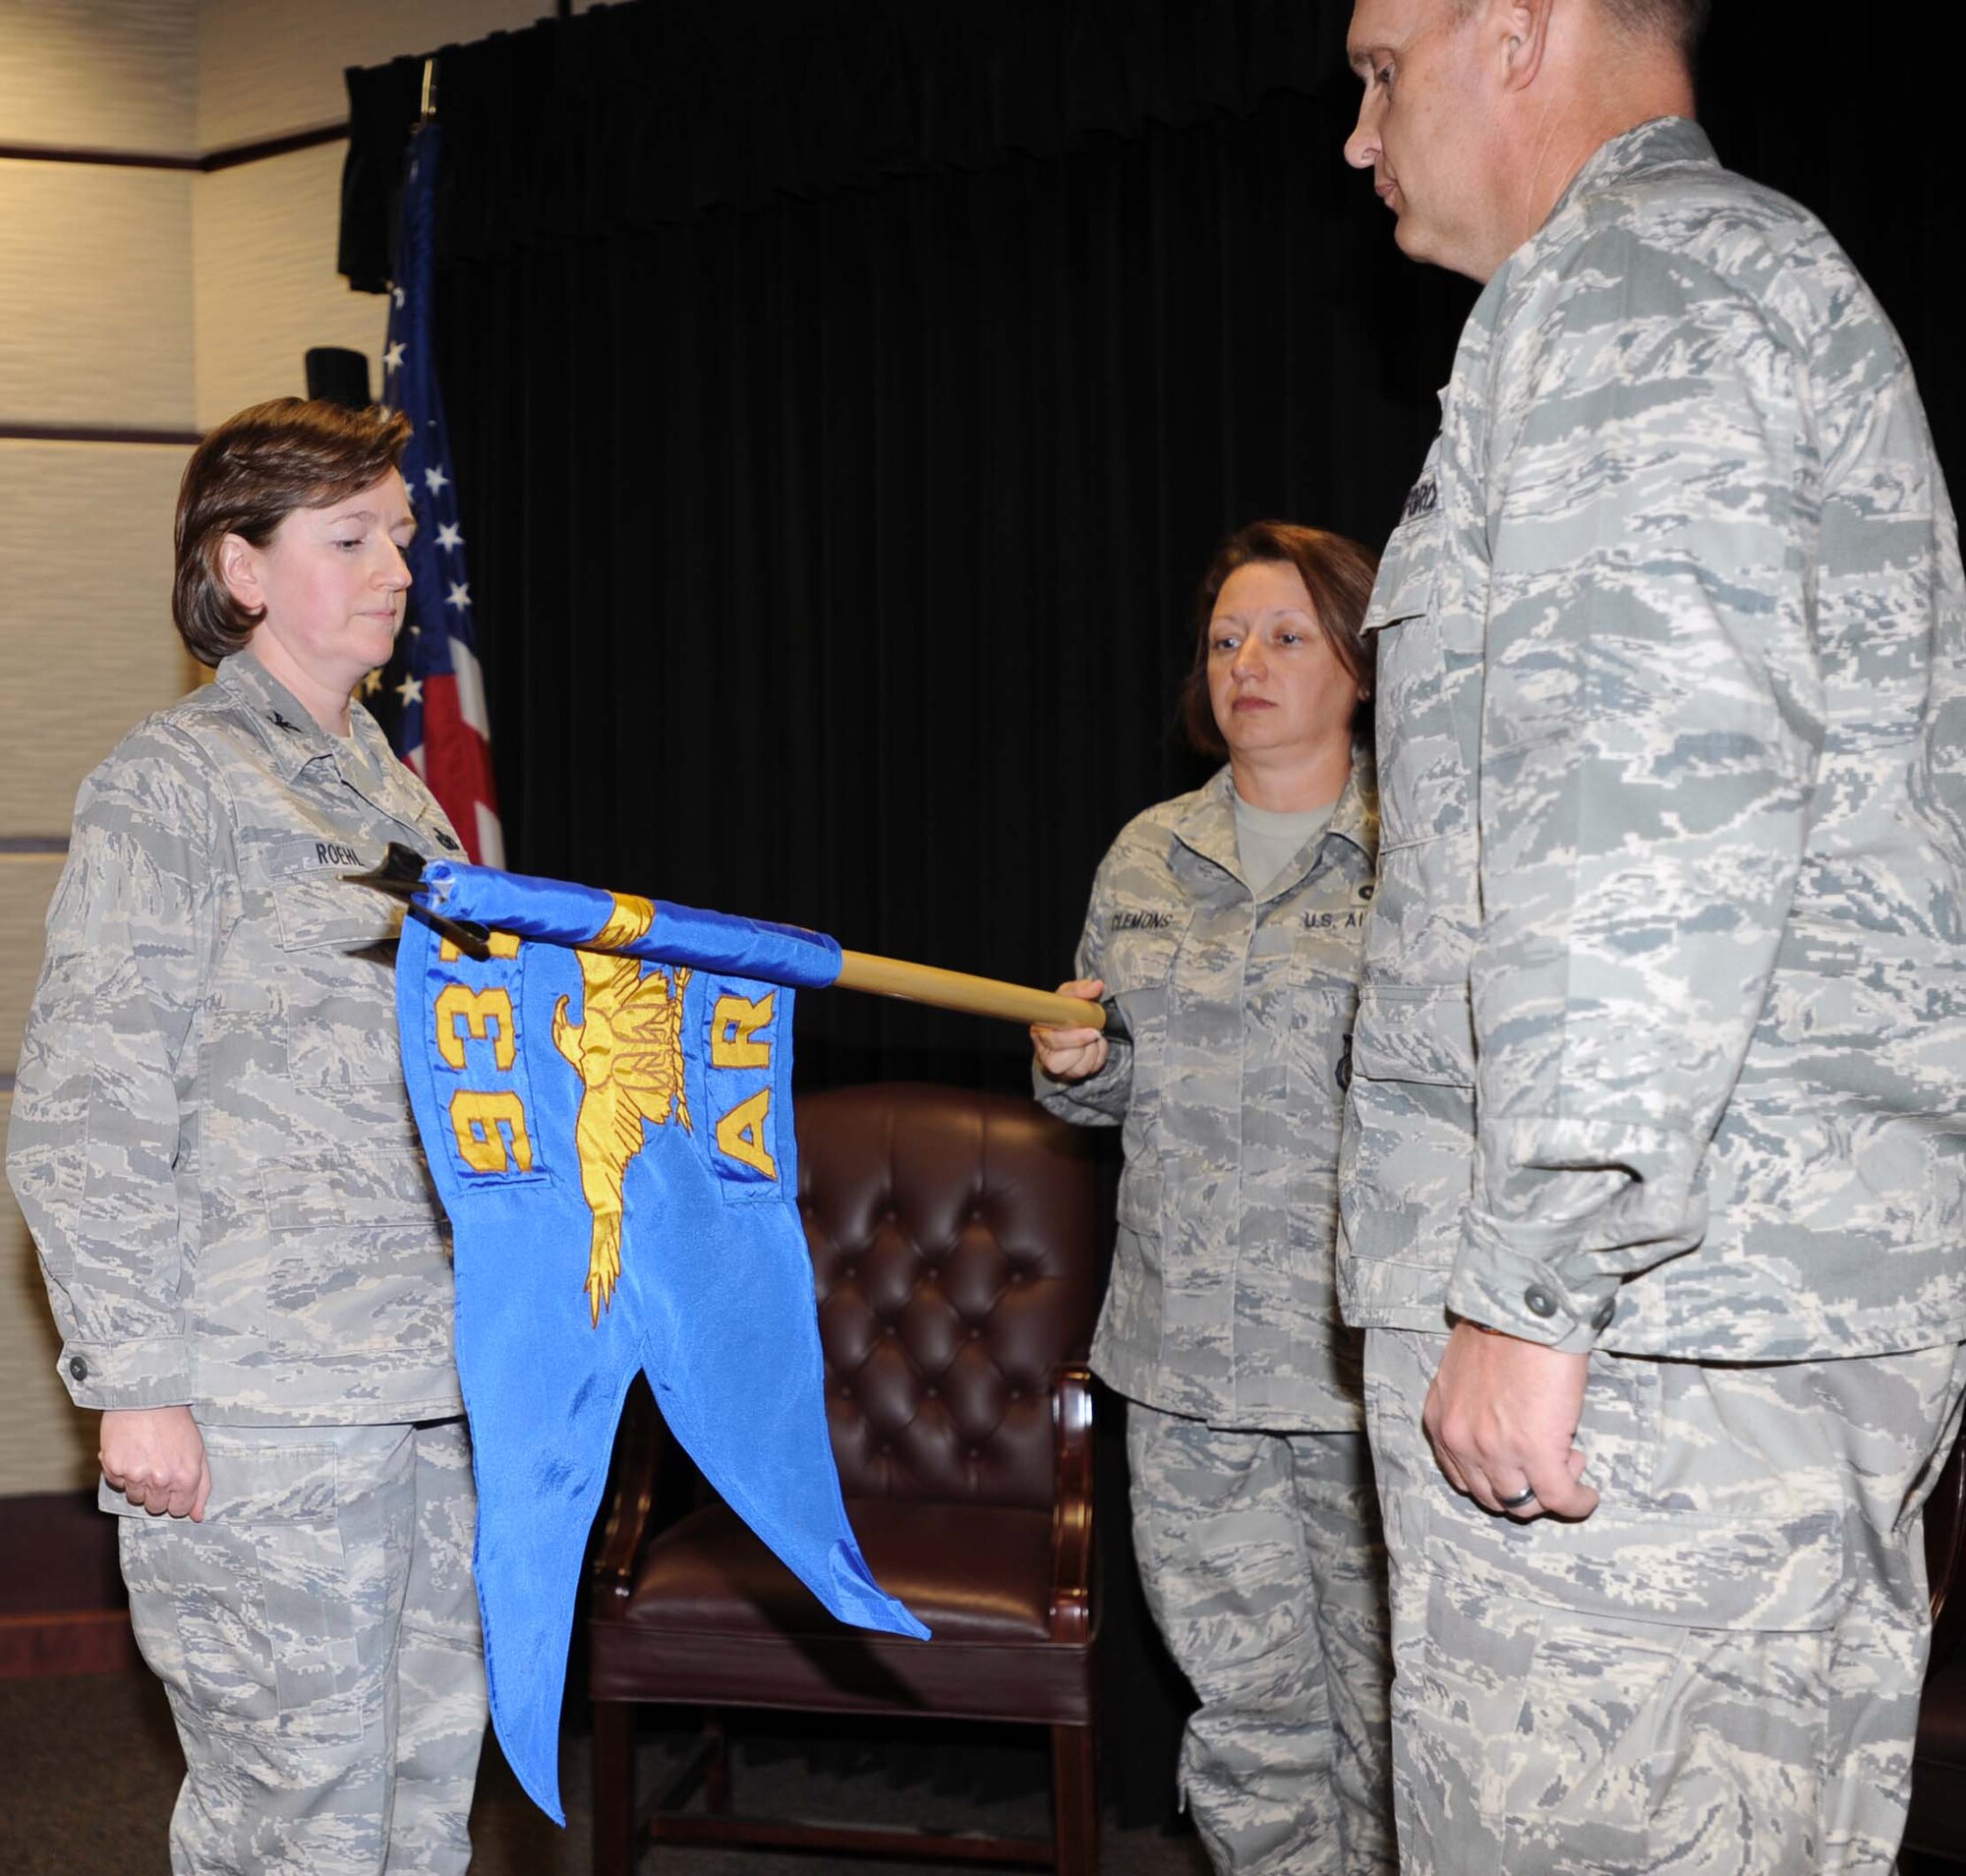 Col. Mary Roehl, Air Force Reserve Command Chief of Security Forces, and Col. William H. Mason, Commander, 931st Air Refueling Group, look on as the 931st Security Forces Squadron guidon is unfurled during a unit activation ceremony at McConnell Air Force Base, Kan., Oct. 1.  The 931st Security Forces Squadron was officially activated during the ceremony.  (U.S. Air Force photo by 1st Lt. Zach Anderson)